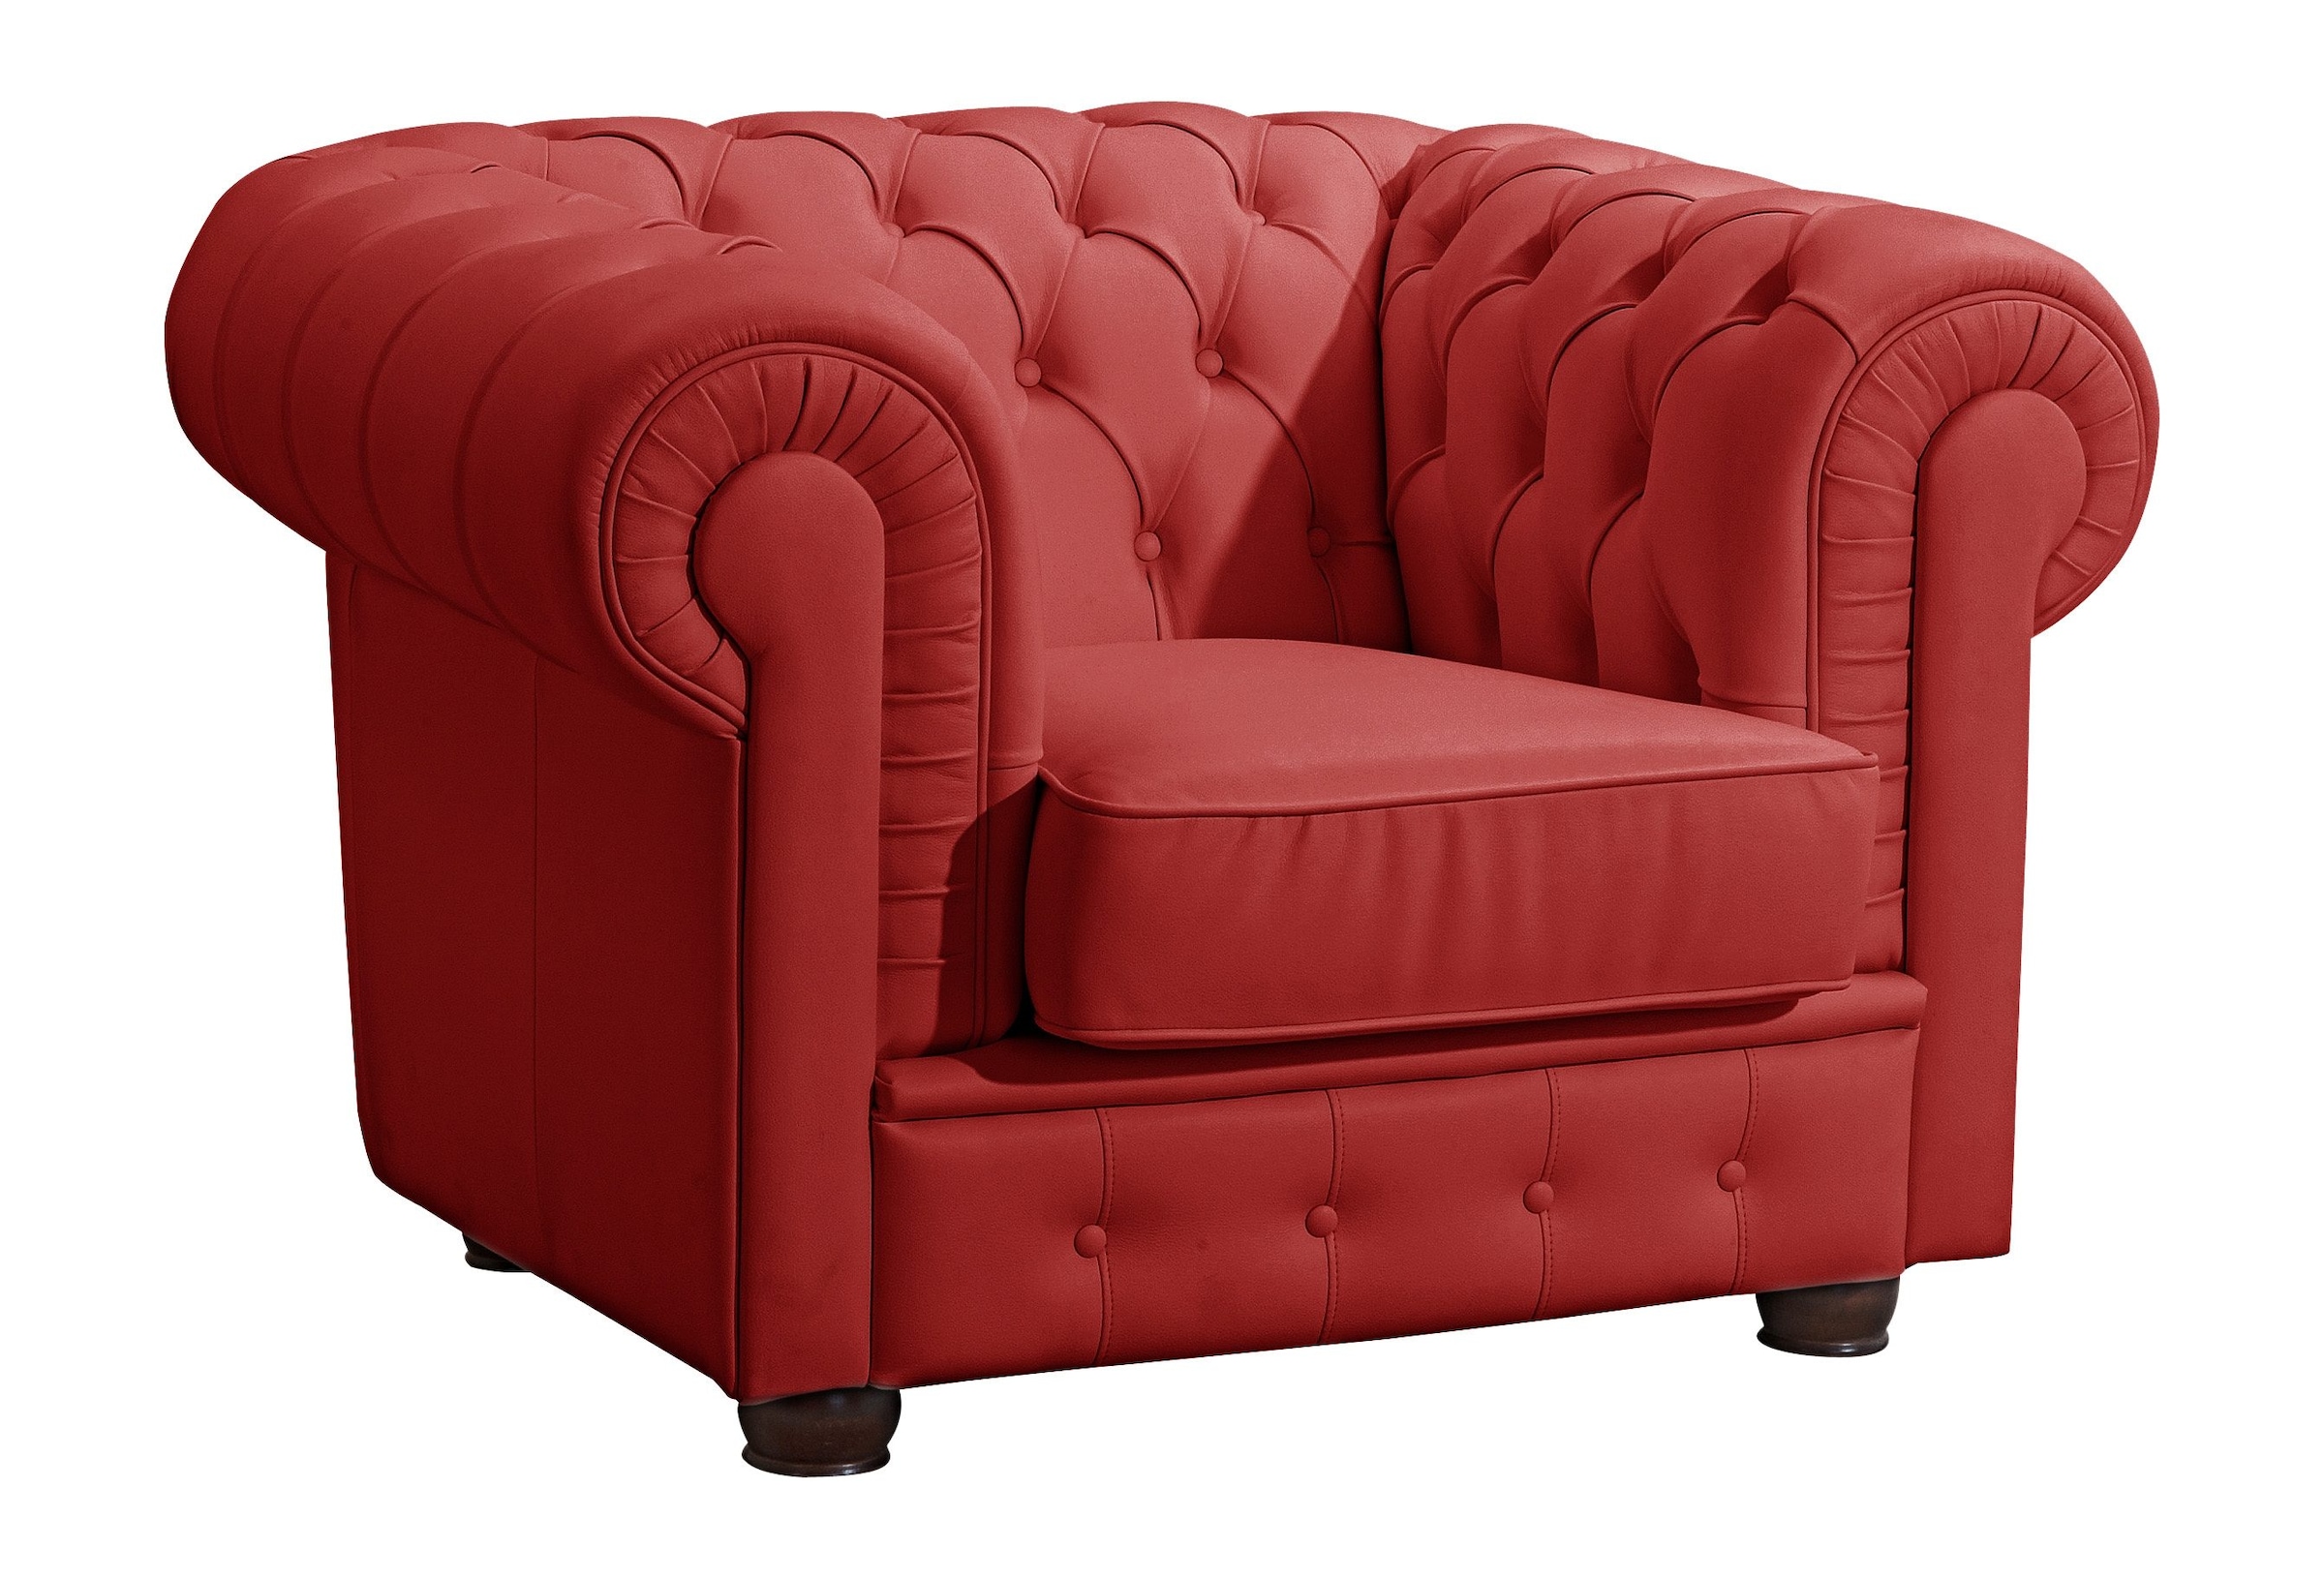 Chesterfield-Sessel »Windsor, Loungesessel«, mit edler Knopfheftung